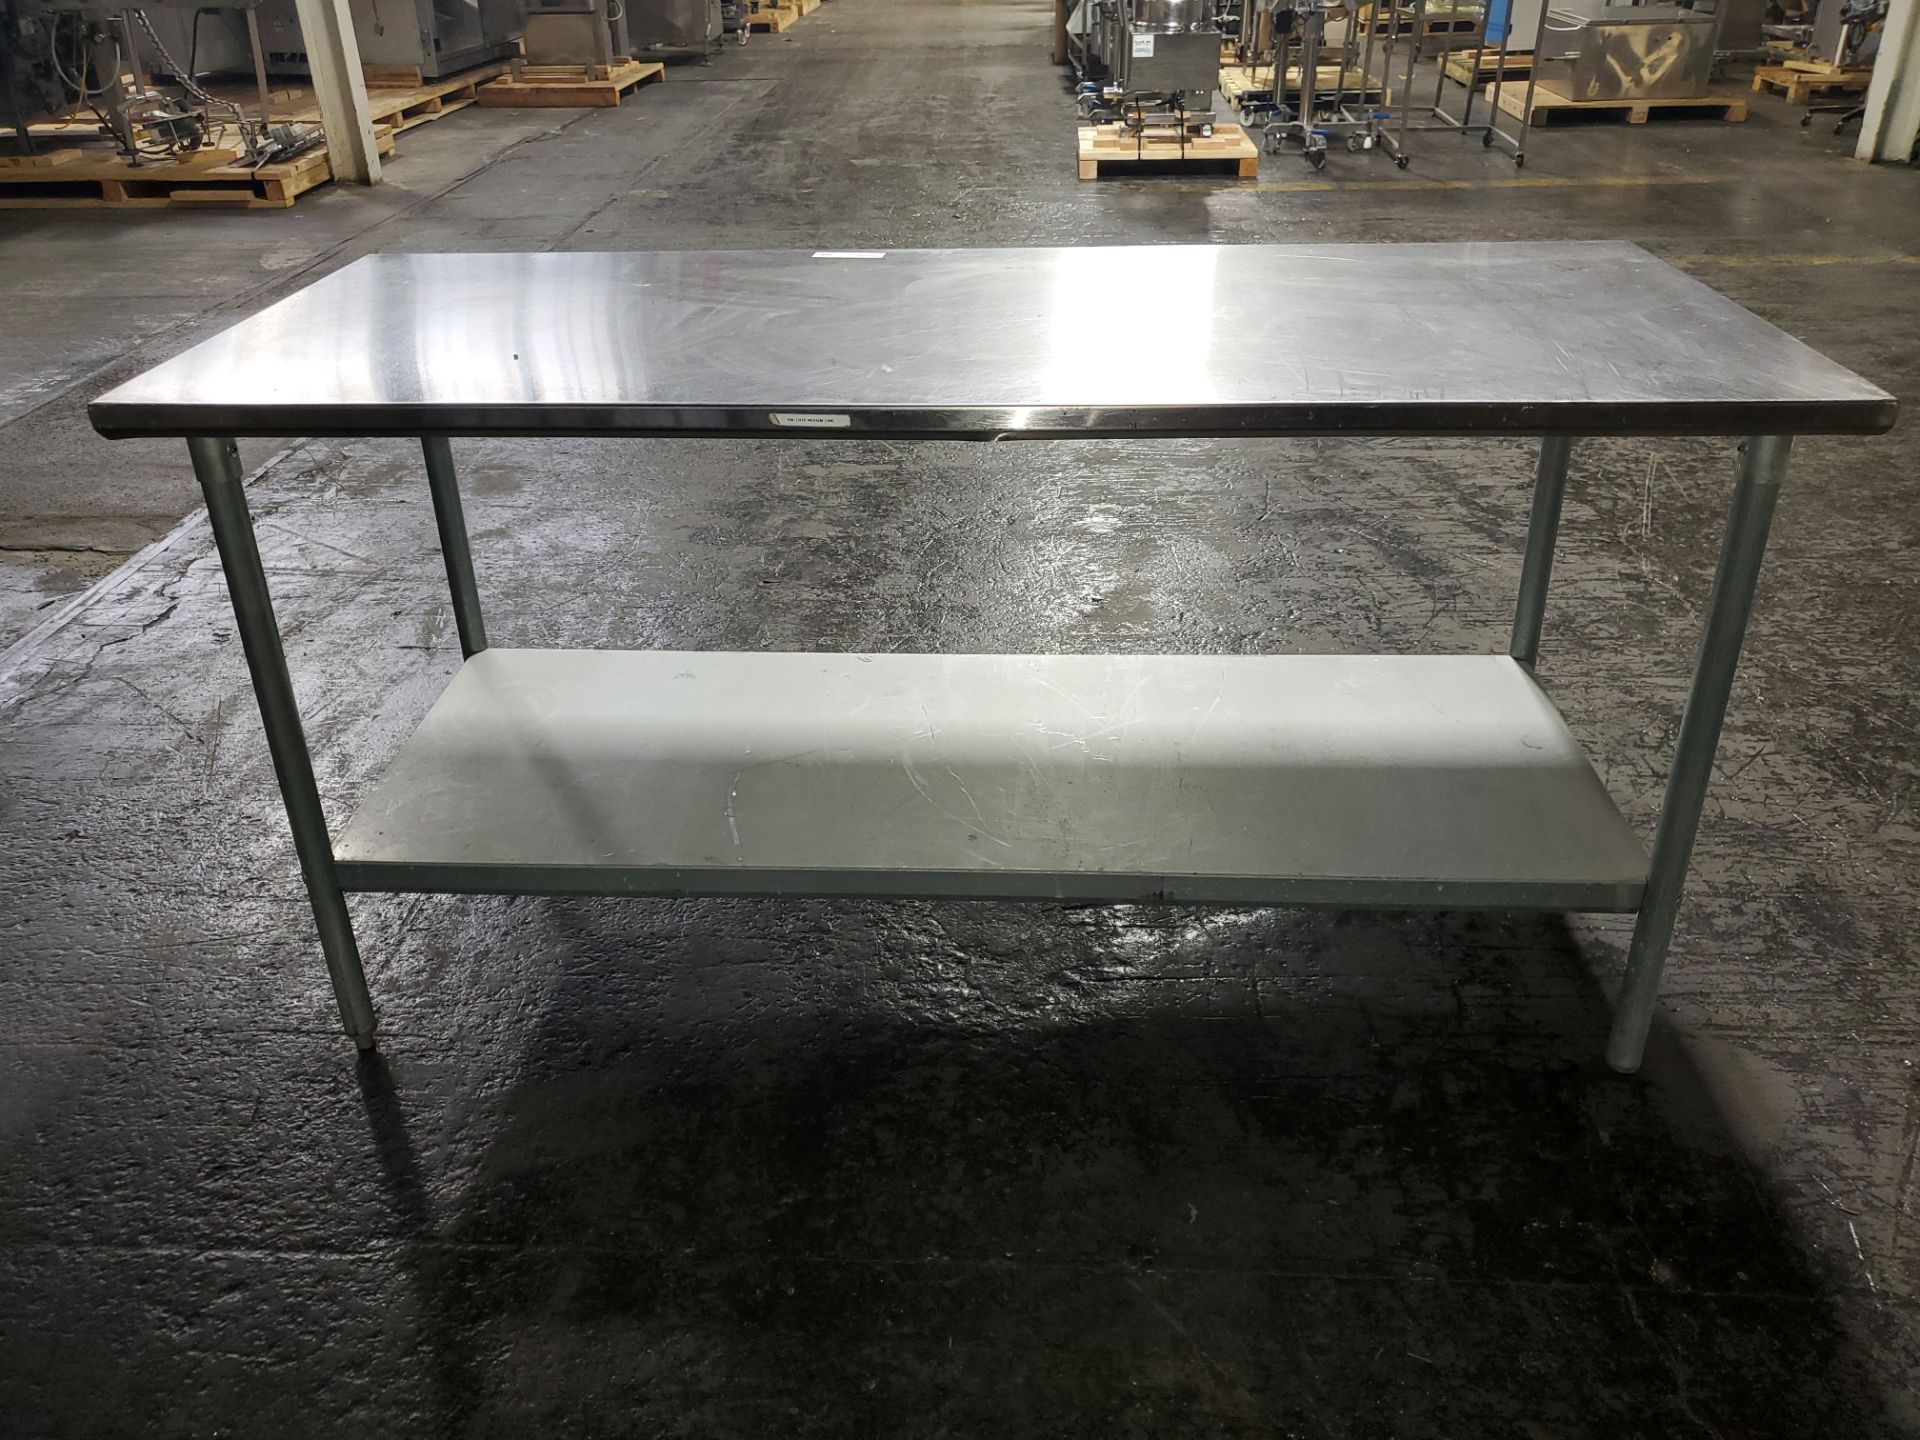 John Boos and Company Stainless Steel Table, 72" long x 30" wide x 33" high - Image 3 of 3